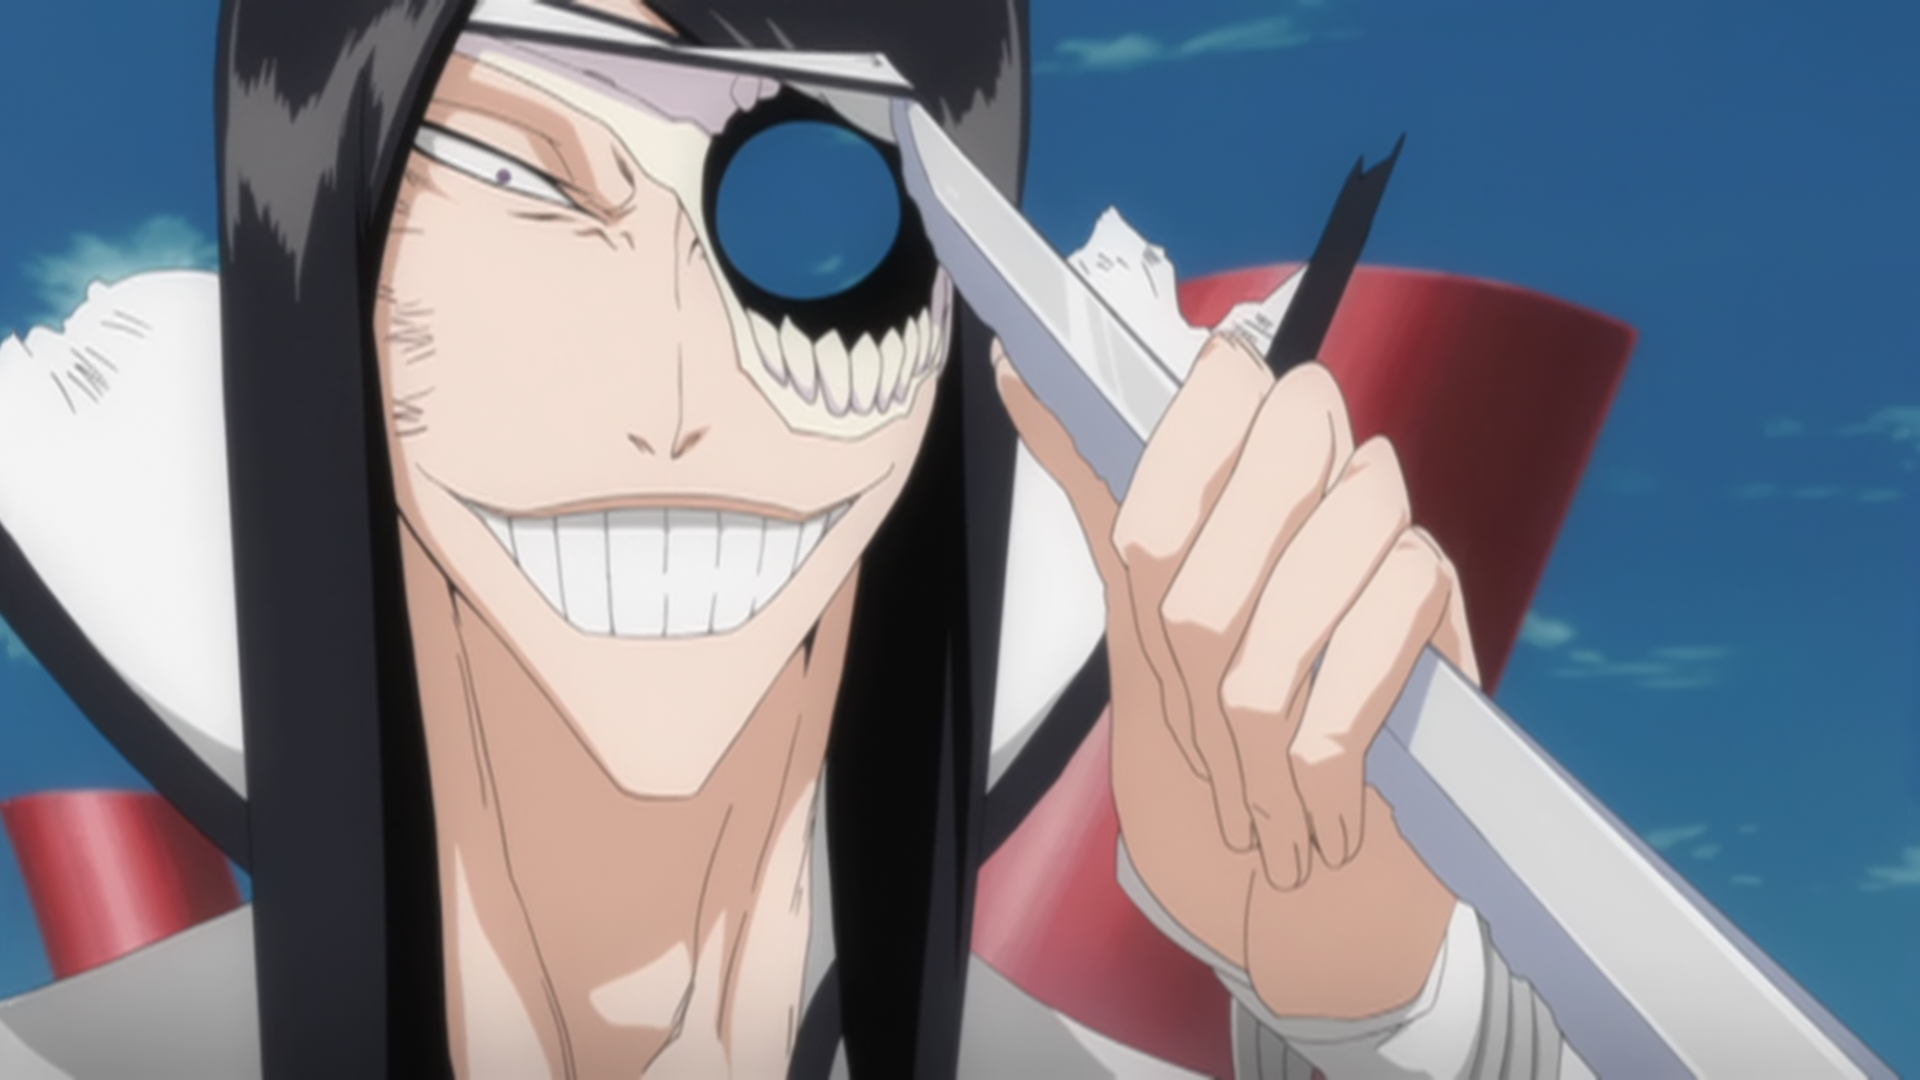 -http://images1.wikia.nocookie.net/__cb20100727120506/bleach/en/images/f/f4/Nnoitra%27s_Hole.png